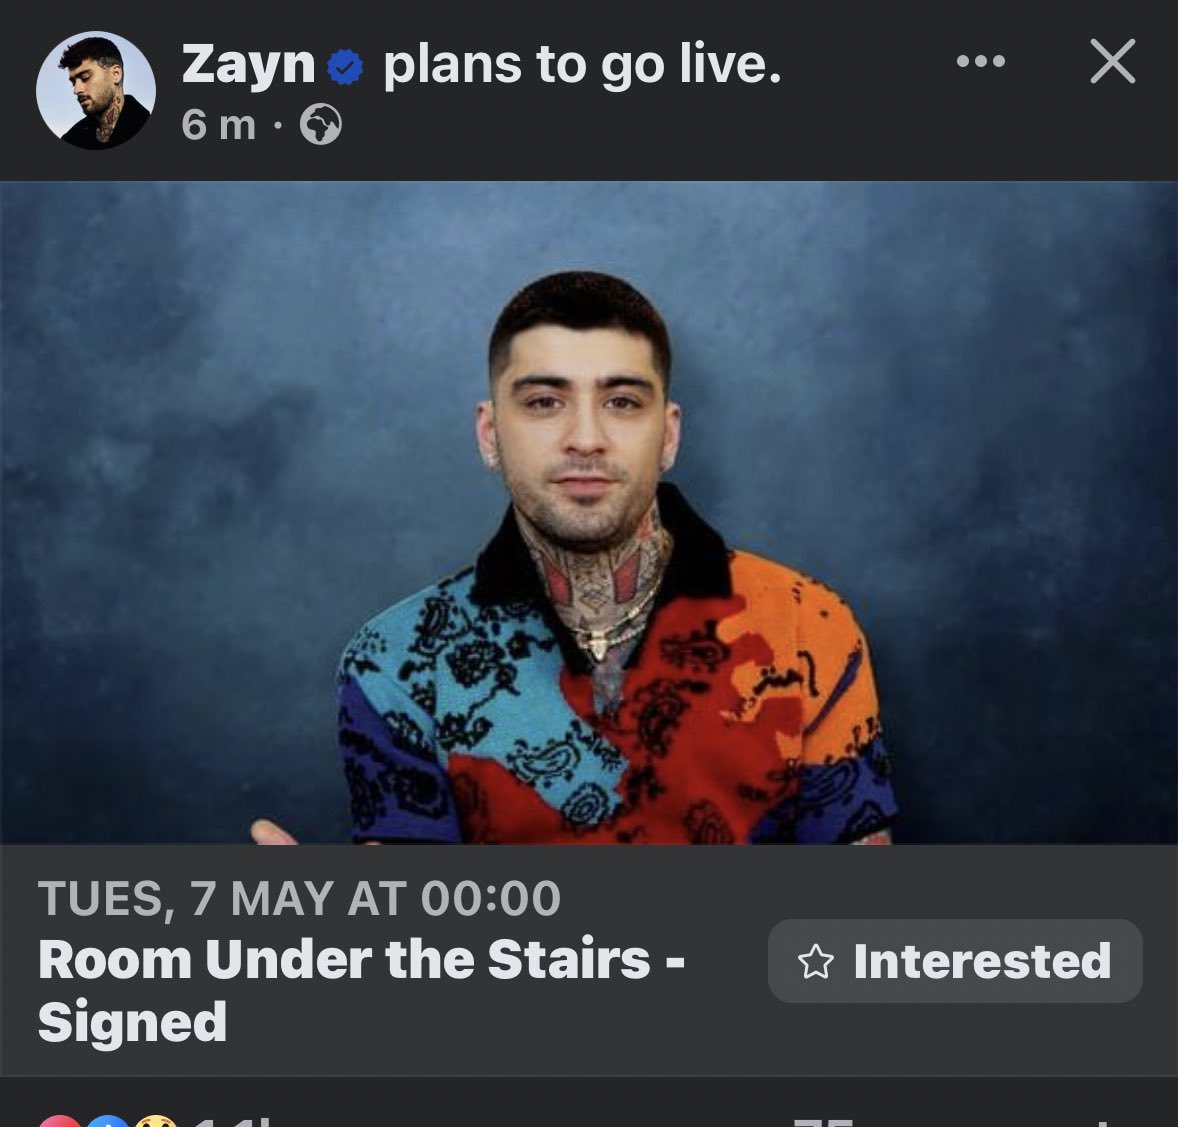 🚨 | ZAYN PLANS TO GO LIVE ON FACEBOOK ON MAY 7TH!